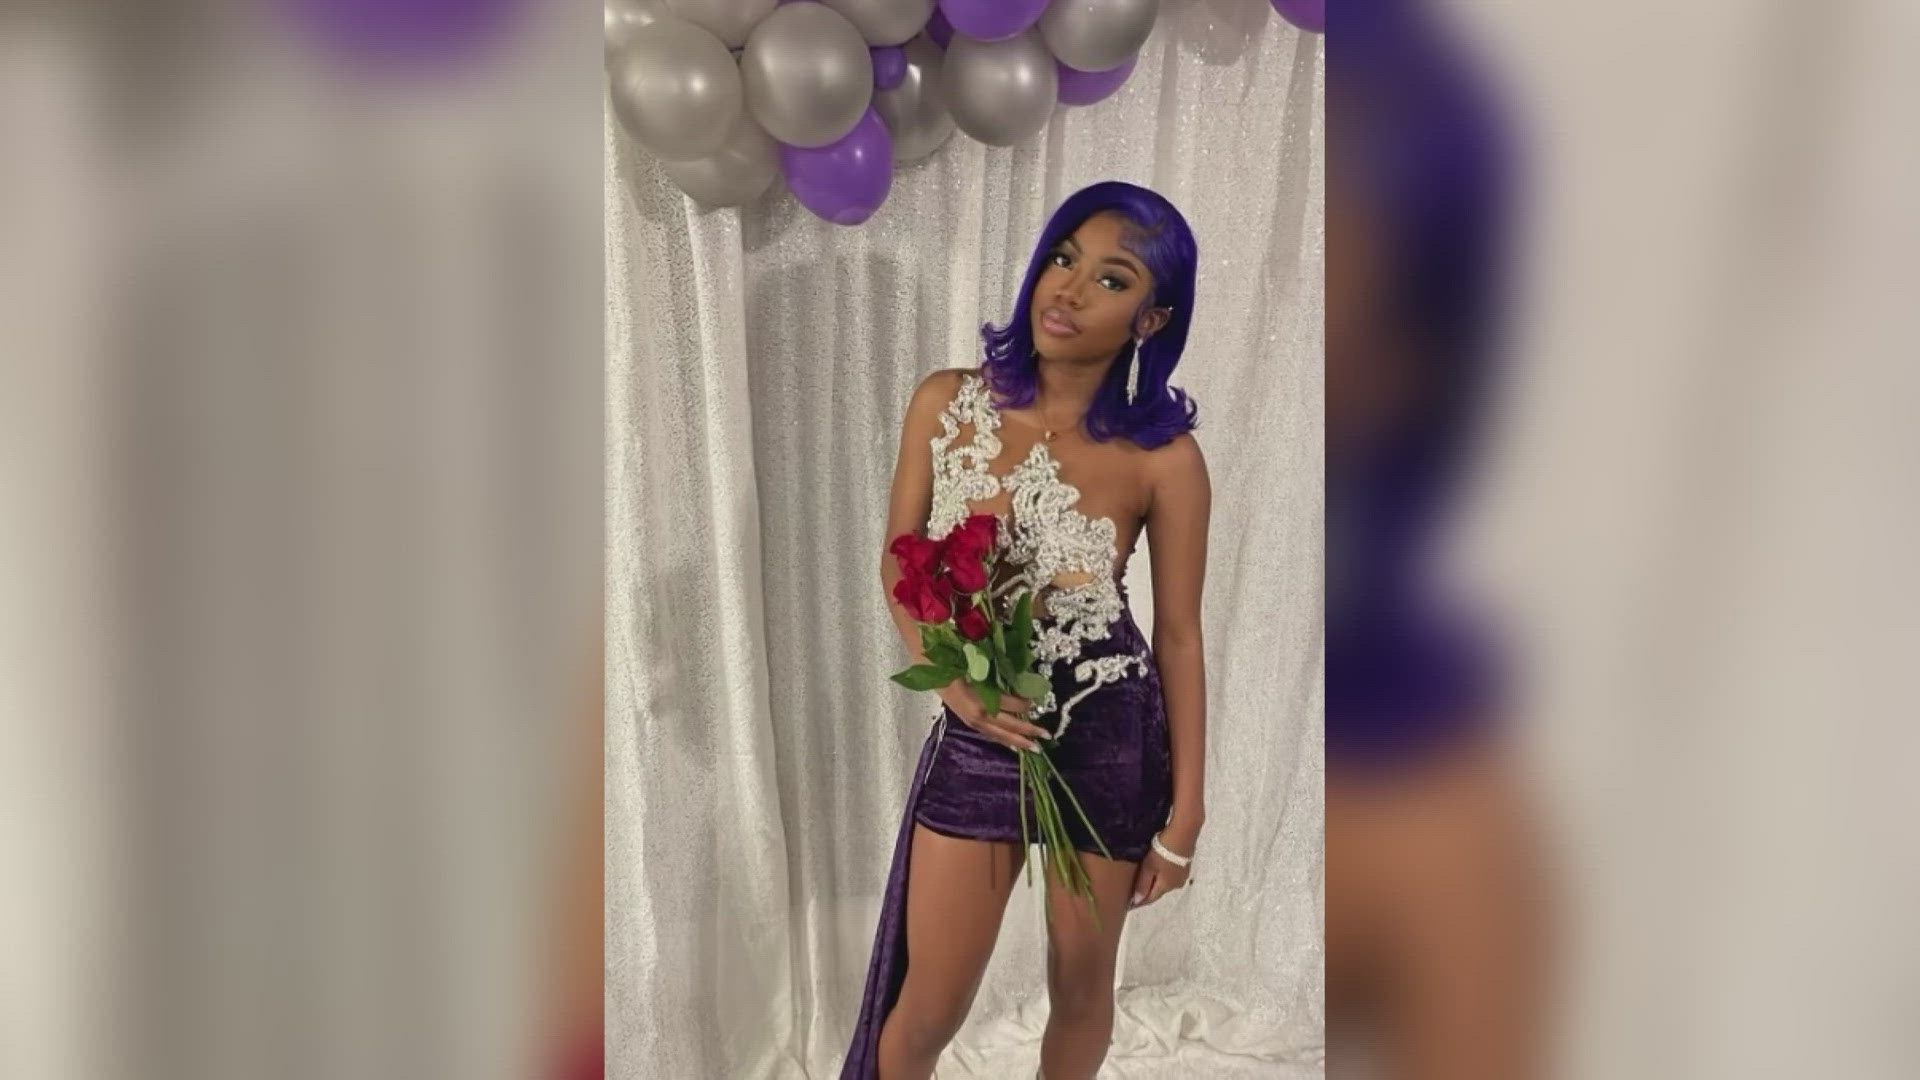 The female victim, 16-year-old Aariah Henry, was shot once and was transferred to St. James Hospital where she later died. Investigators believe she was targeted.